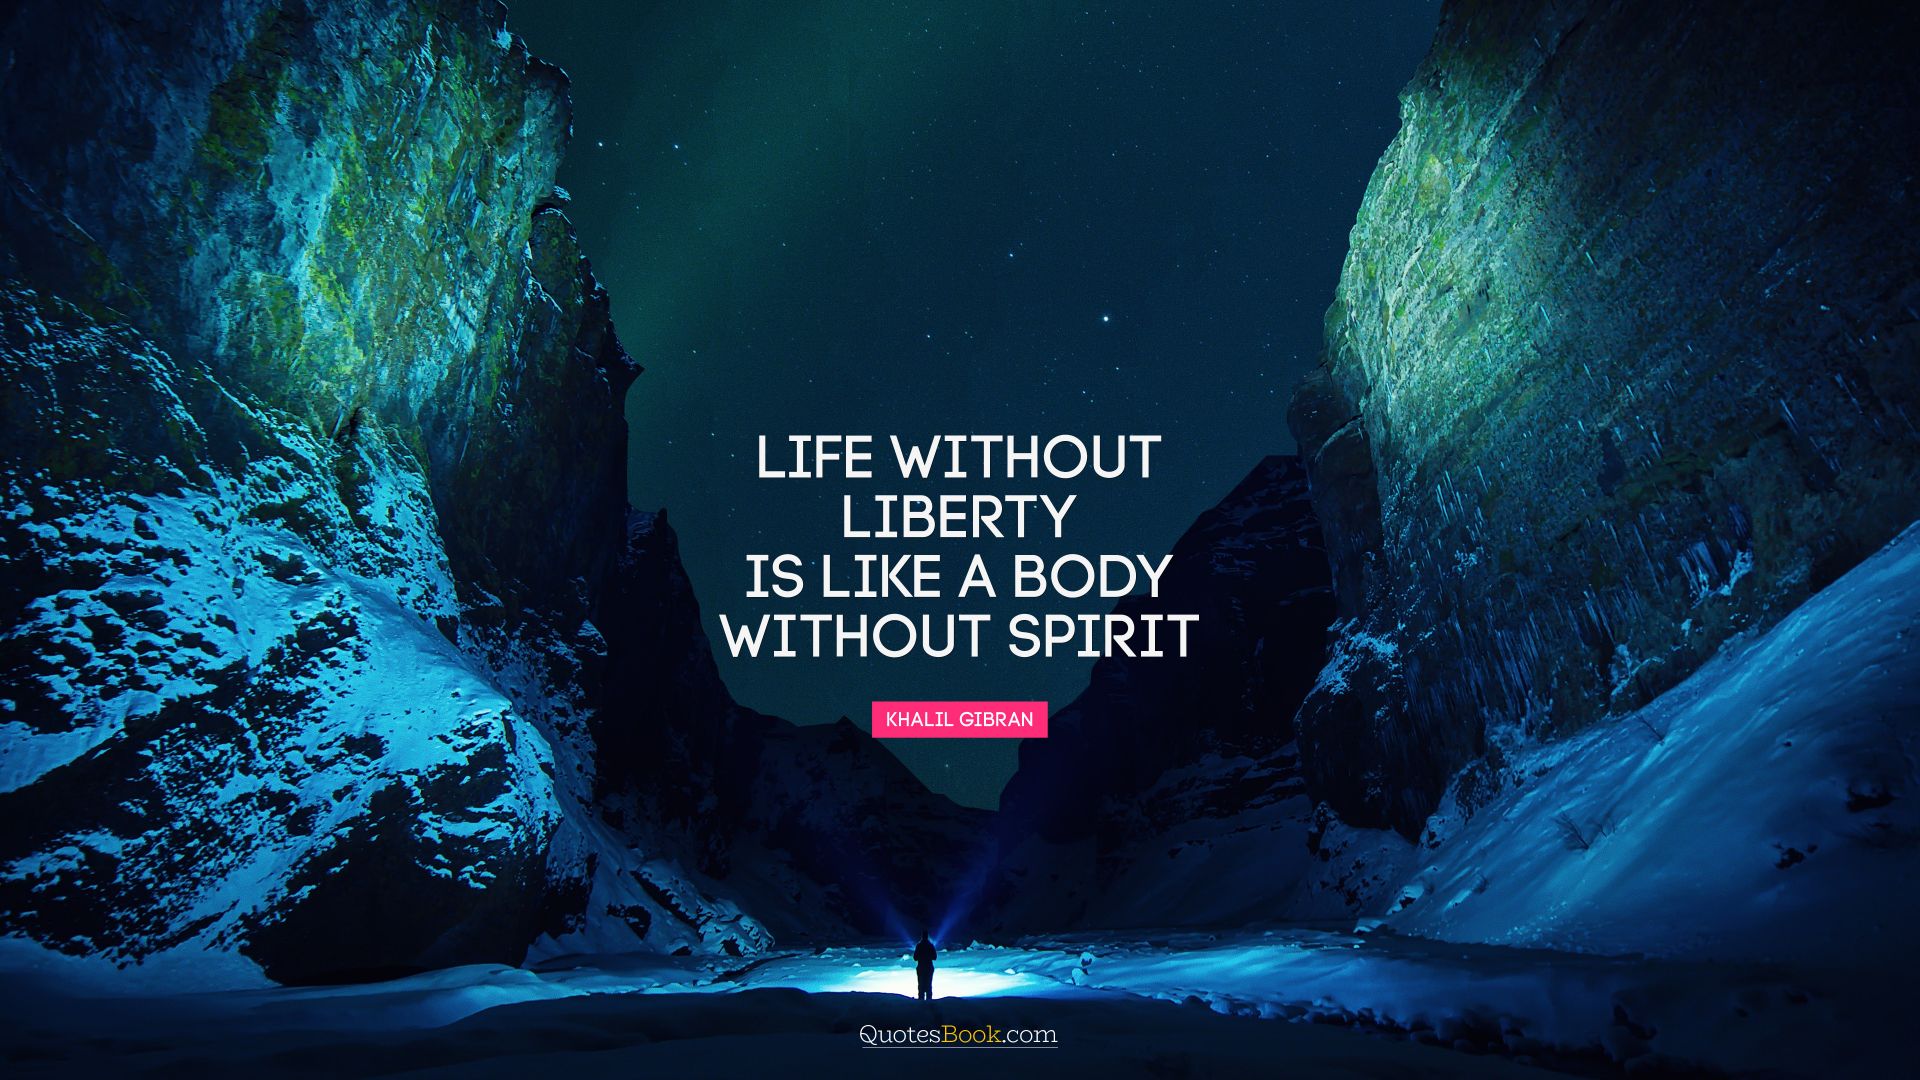 Life without liberty is like a body without spirit. - Quote by Khalil Gibran